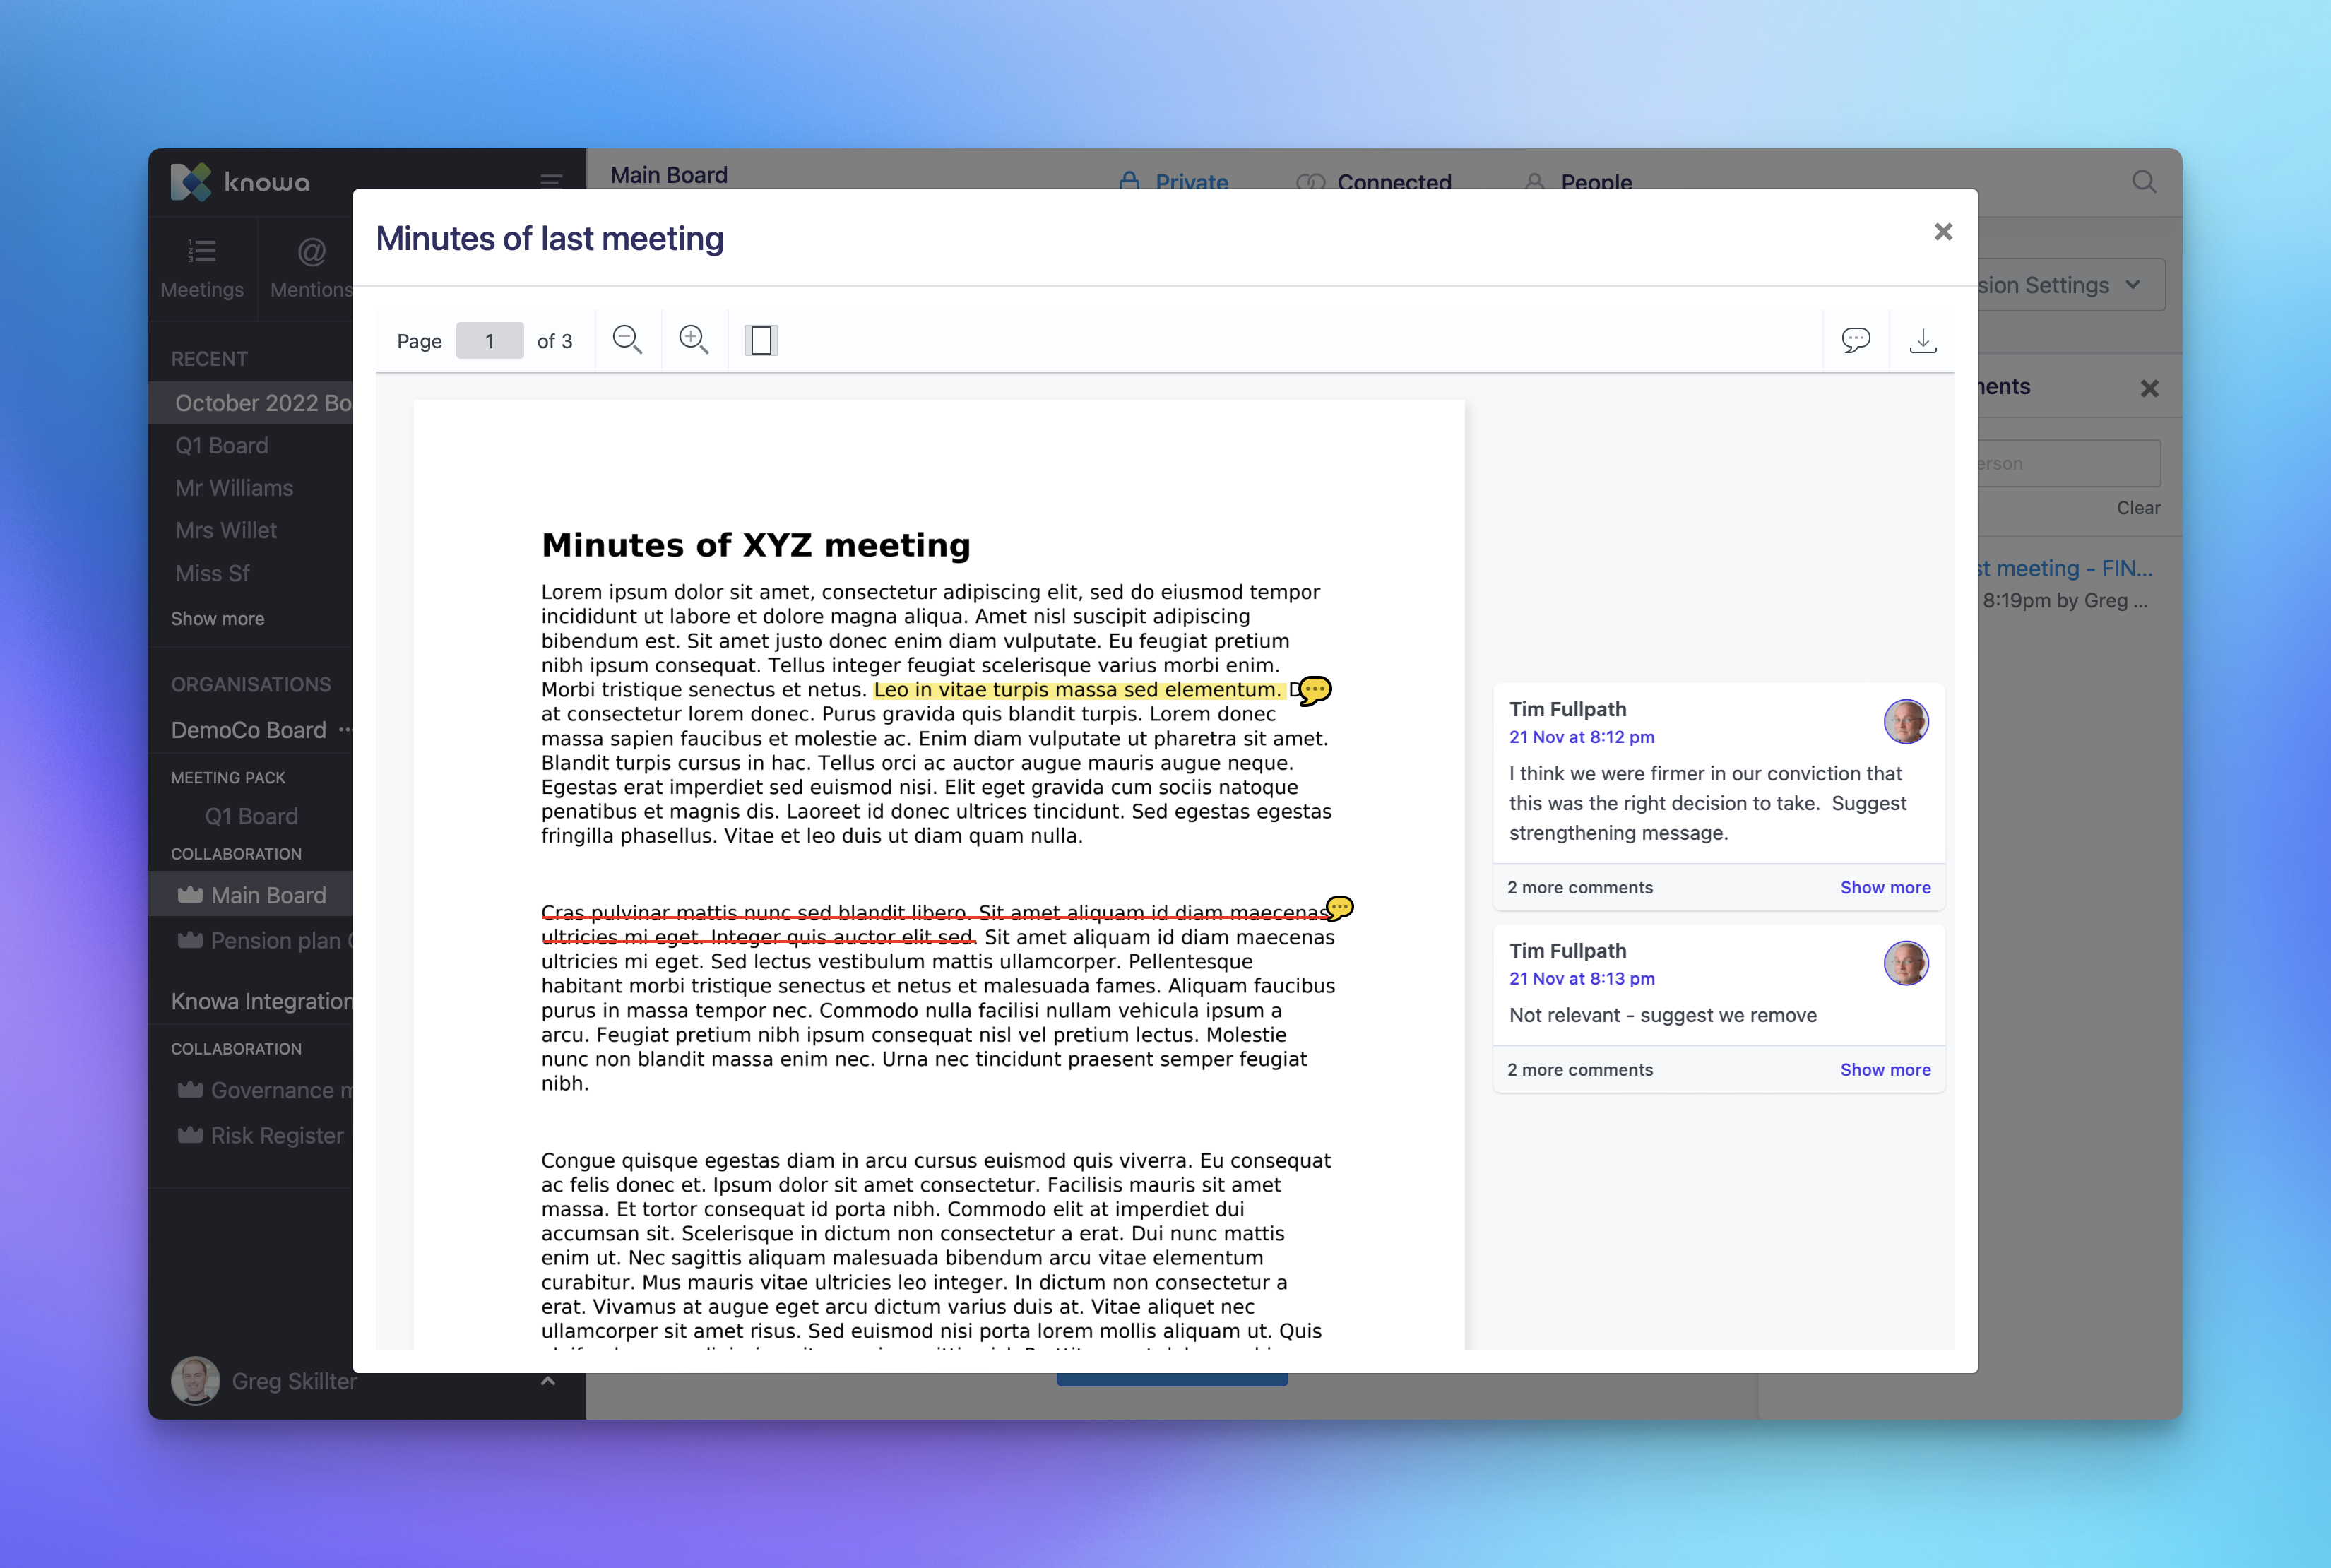 Collaborative Documents: Rapidly gather feedback from the board and team on documents